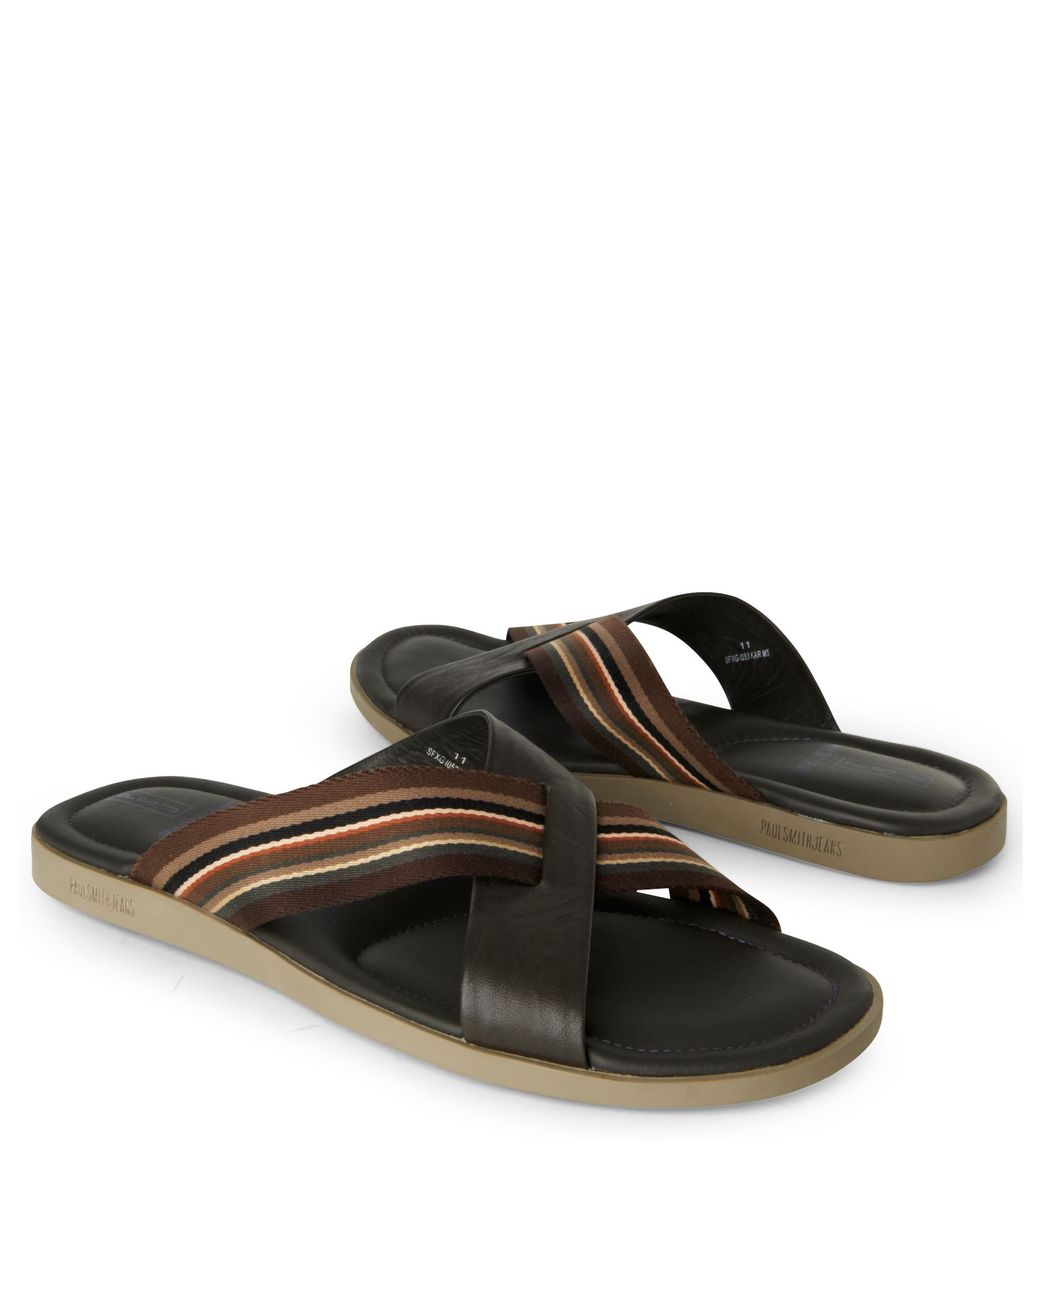 Paul Smith Lalo Web Crossover Sandals in for Men Lyst UK